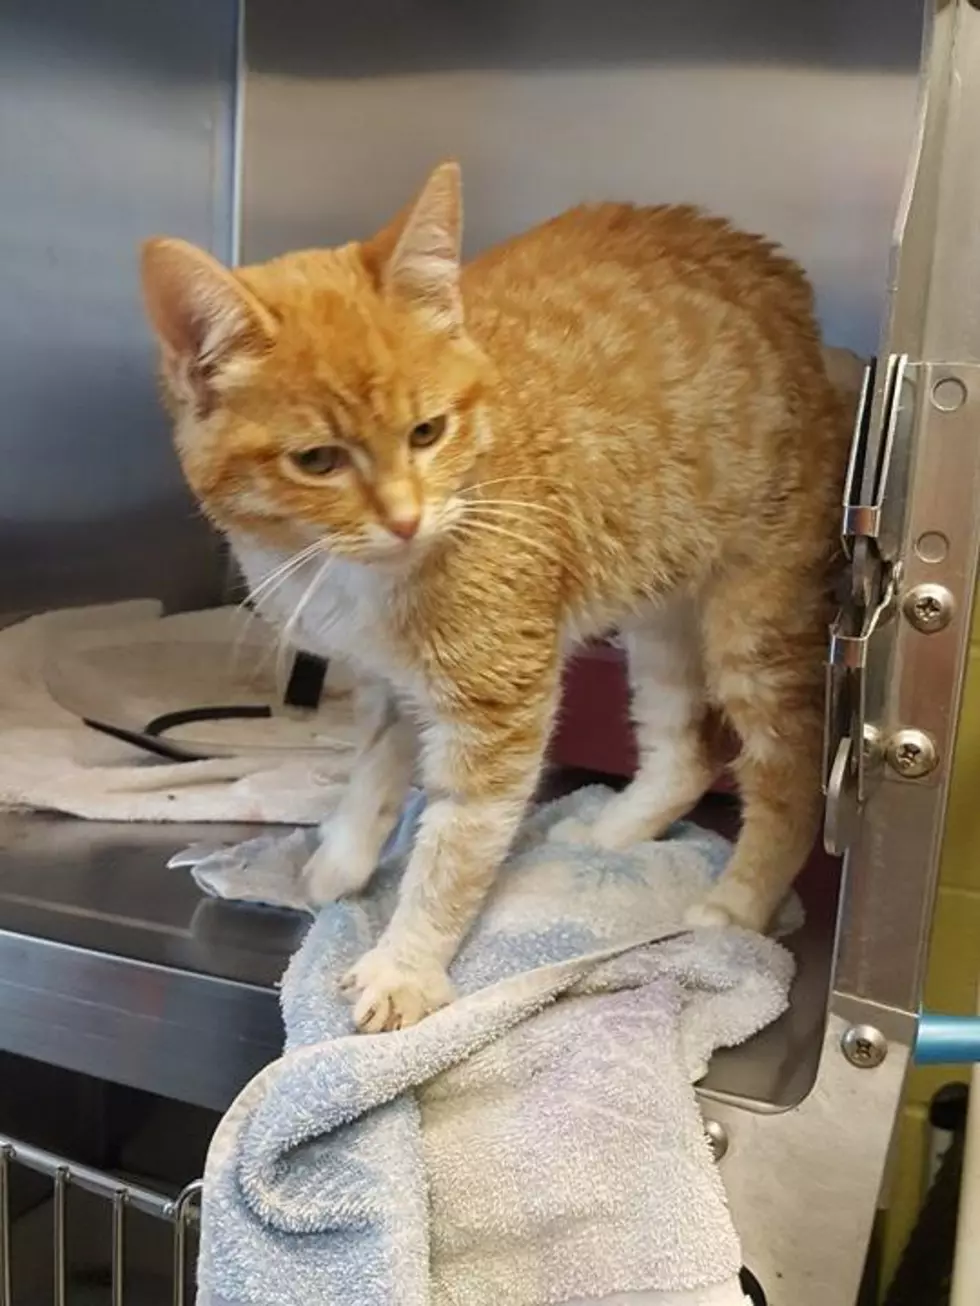 Texoma Cat That Had Tail Ripped Off Has Sadly Passed Away